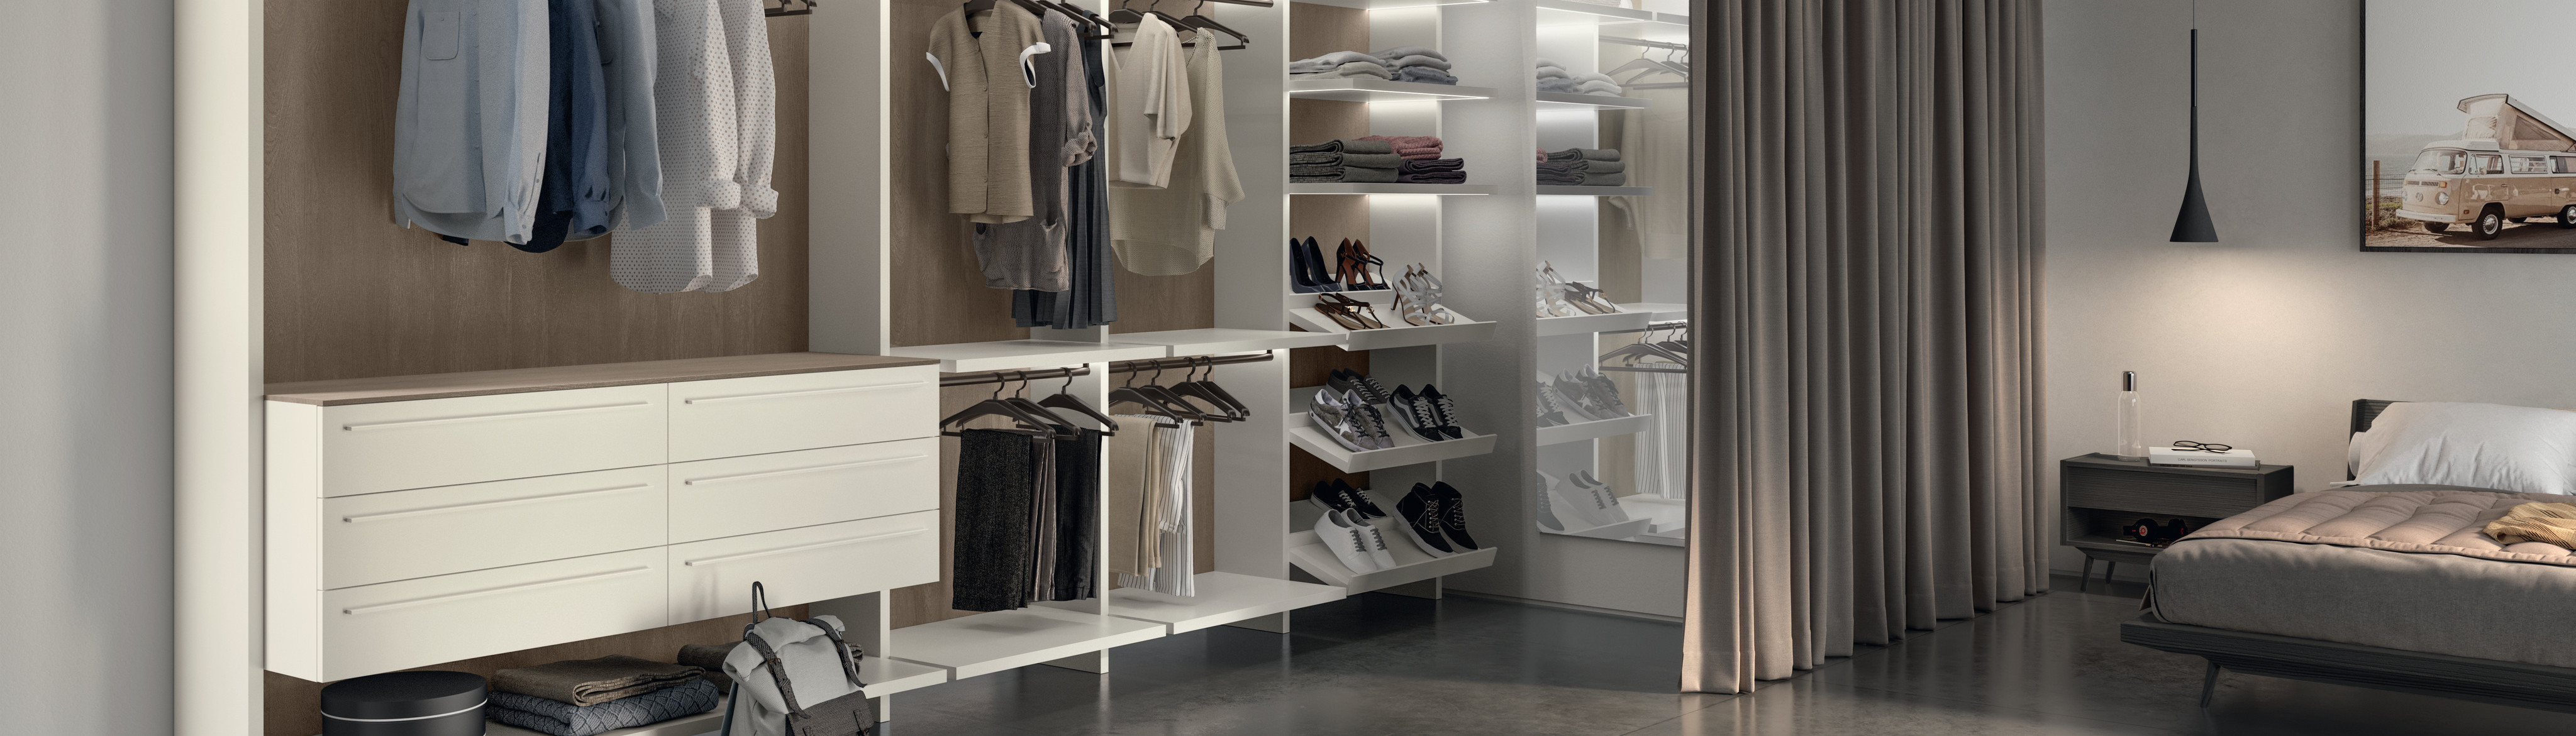 How to organize your walk-in closet